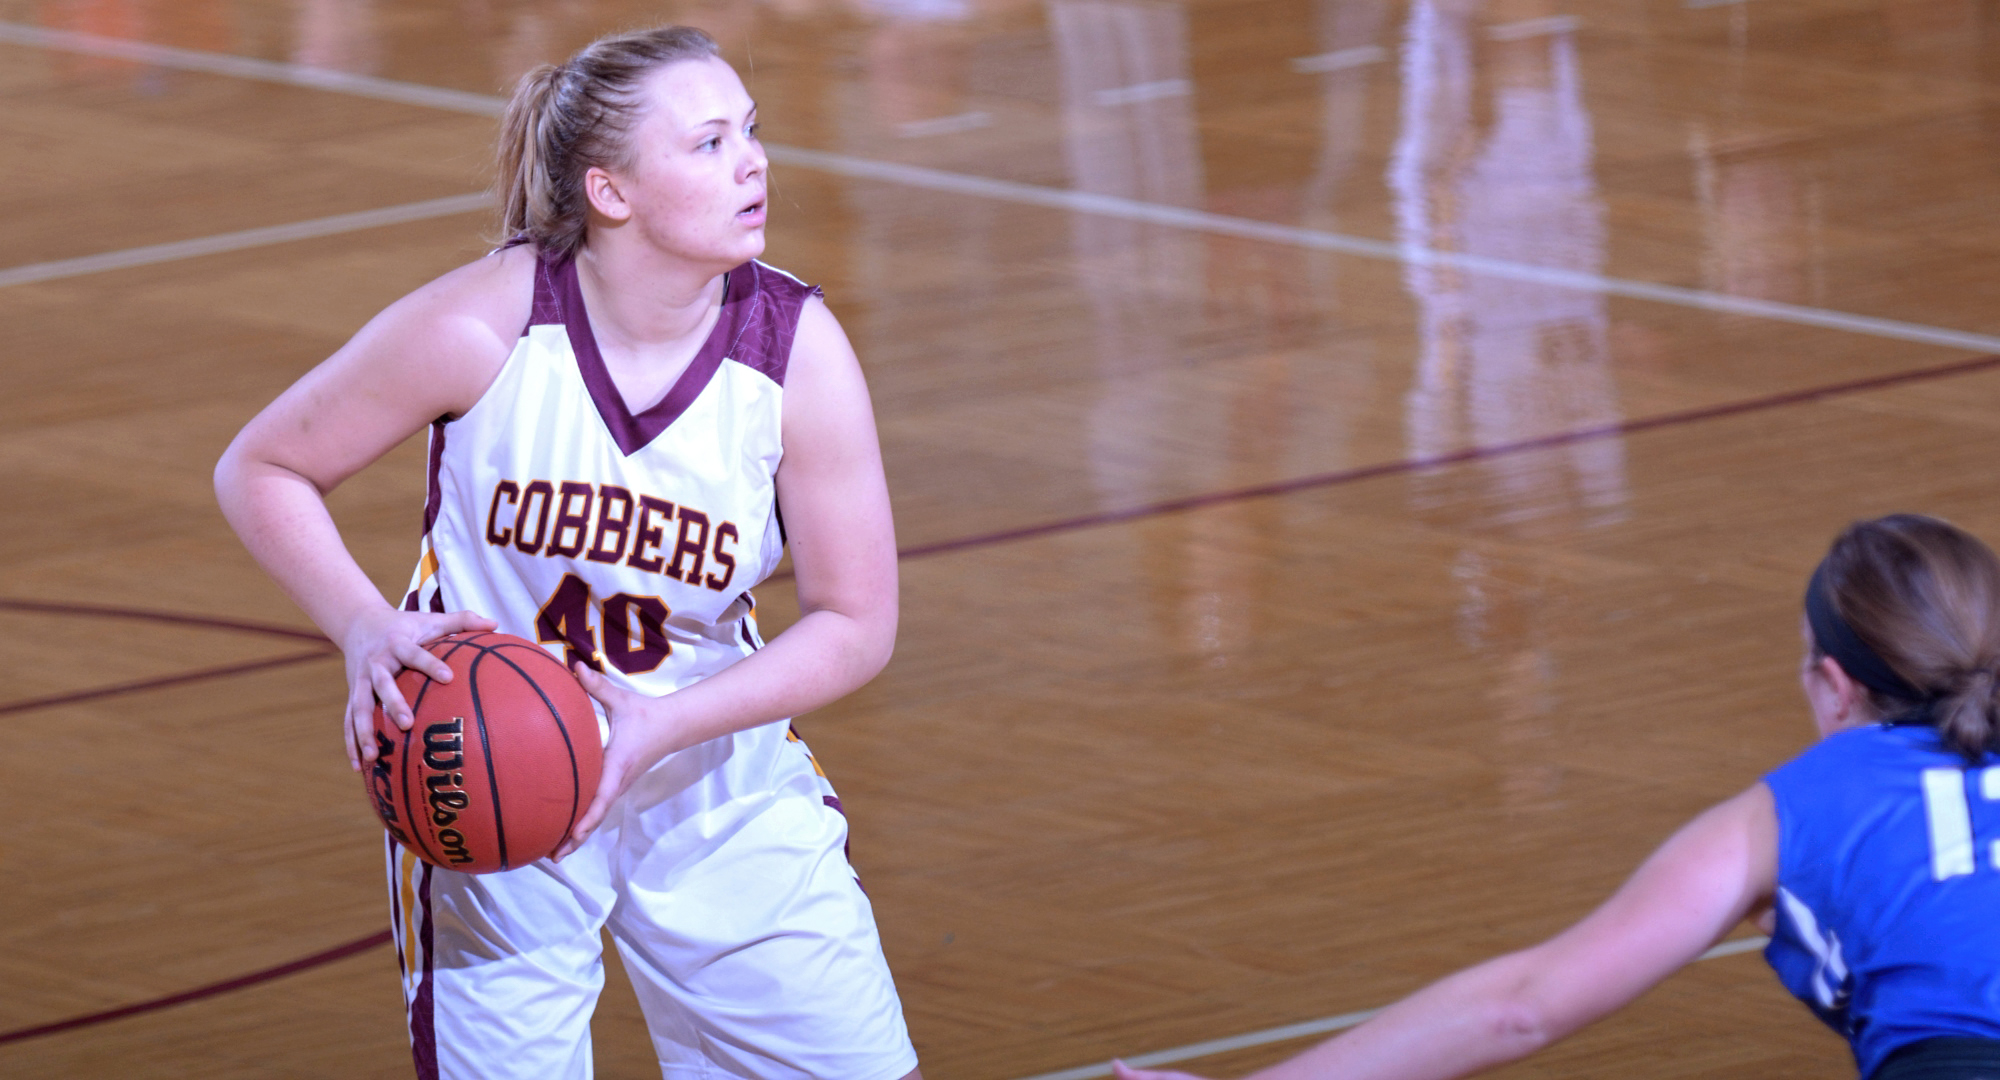 Sophomore Mira Ellefson led Concordia in scoring with 13 points in the team's conference opener at Macalester.